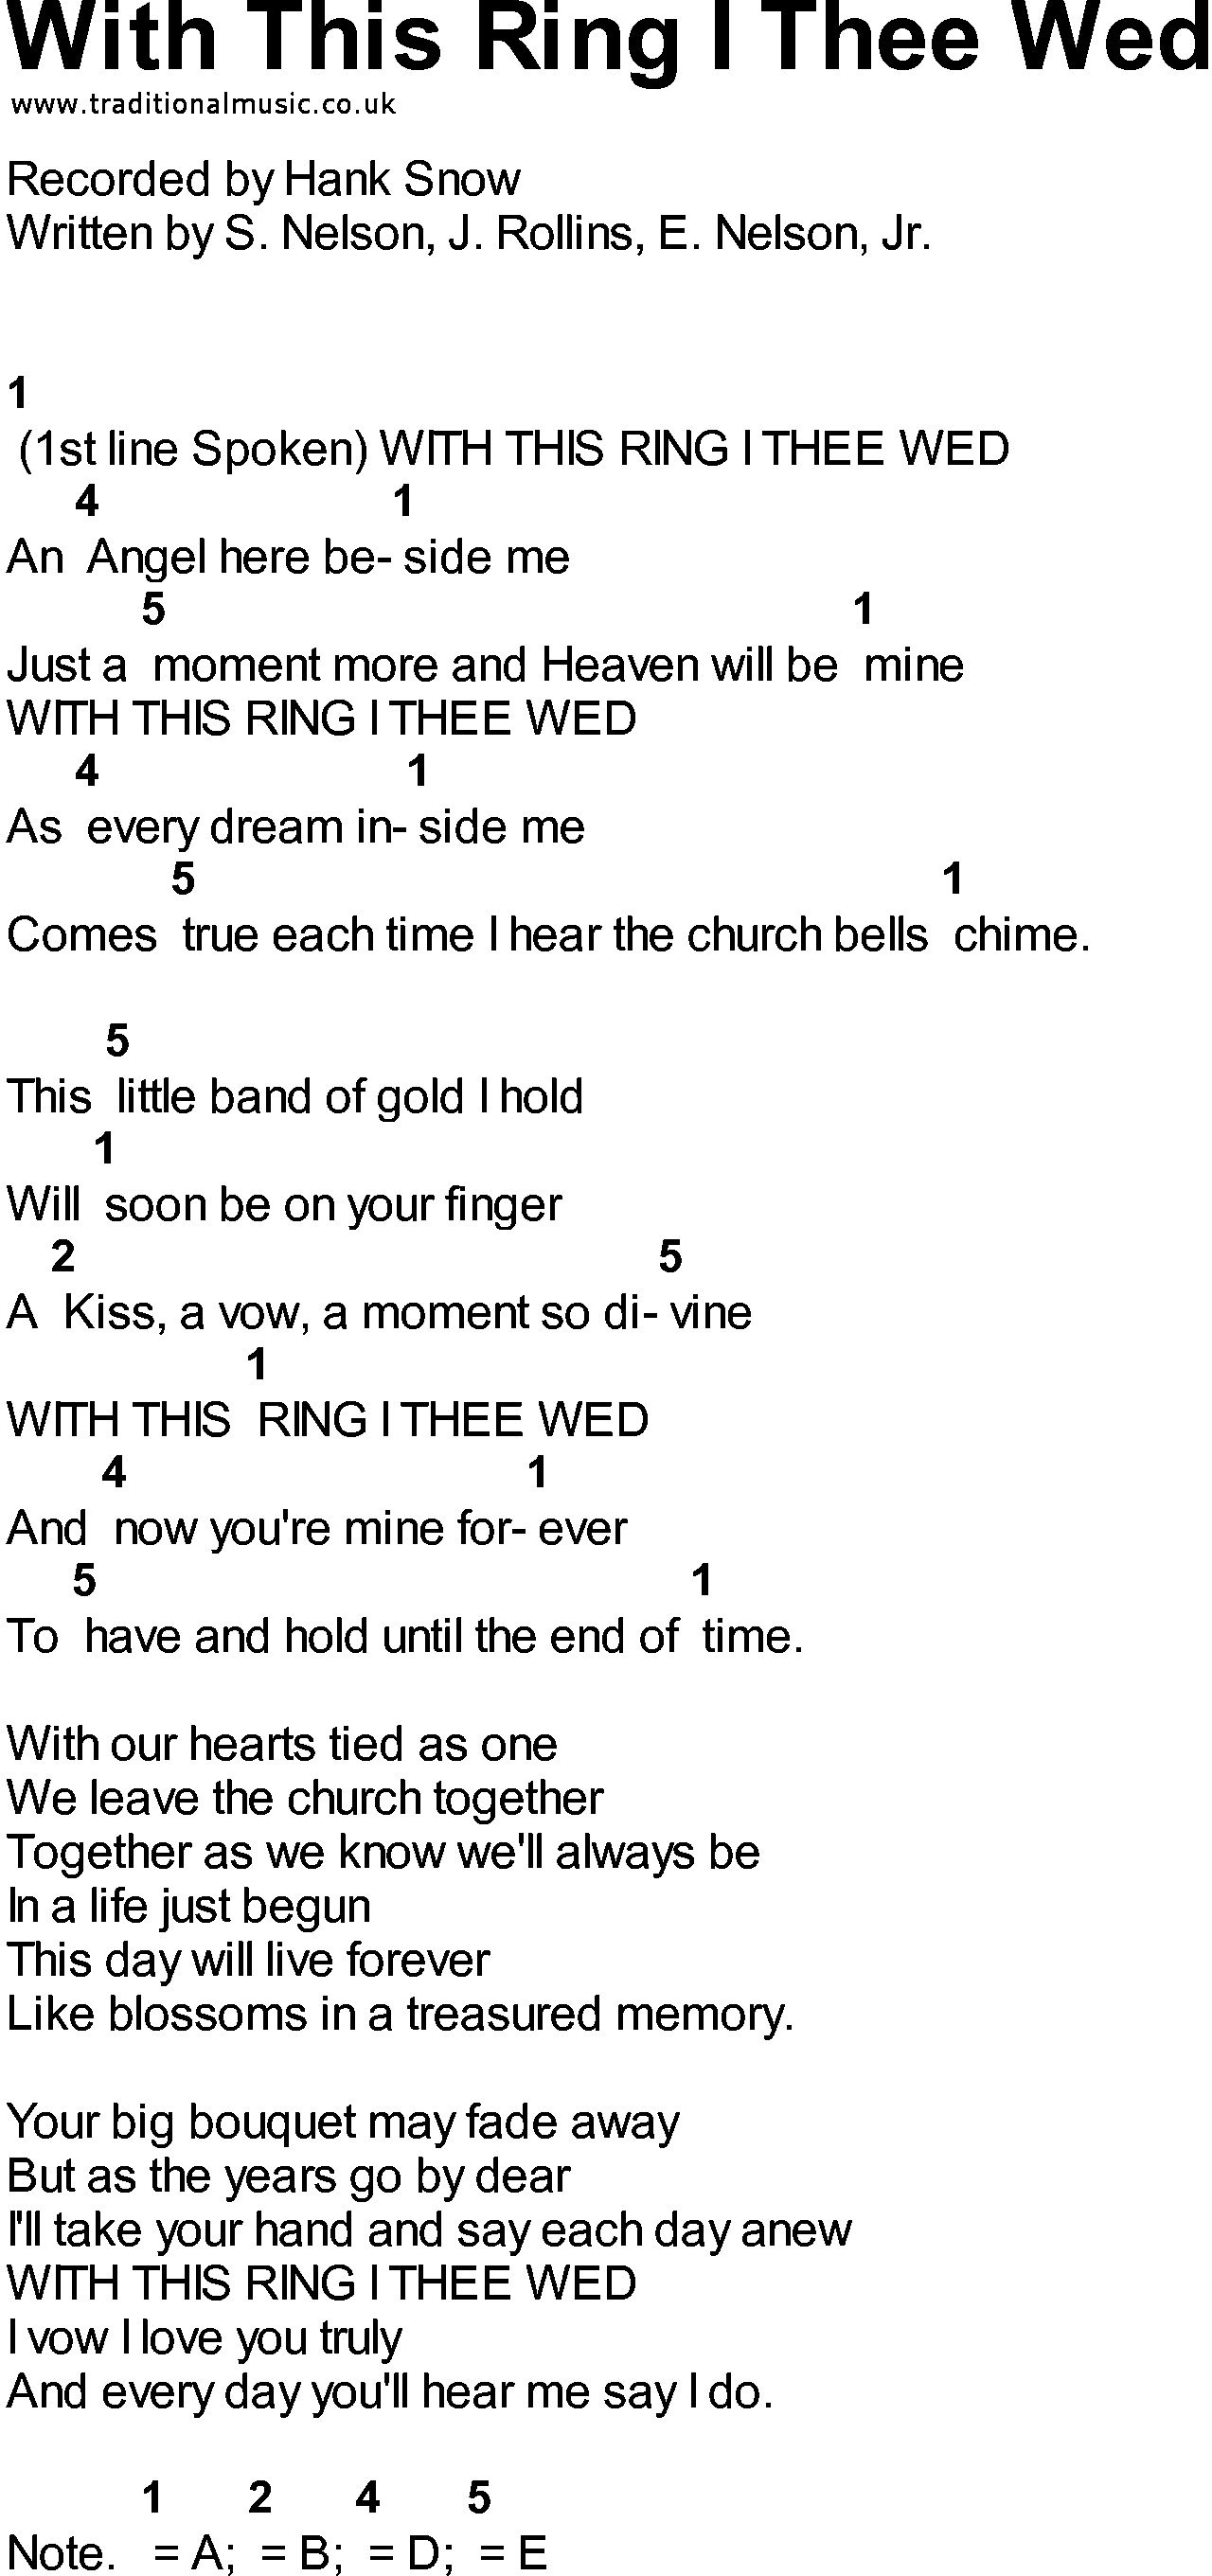 Bluegrass songs with chords - With This Ring I Thee Wed